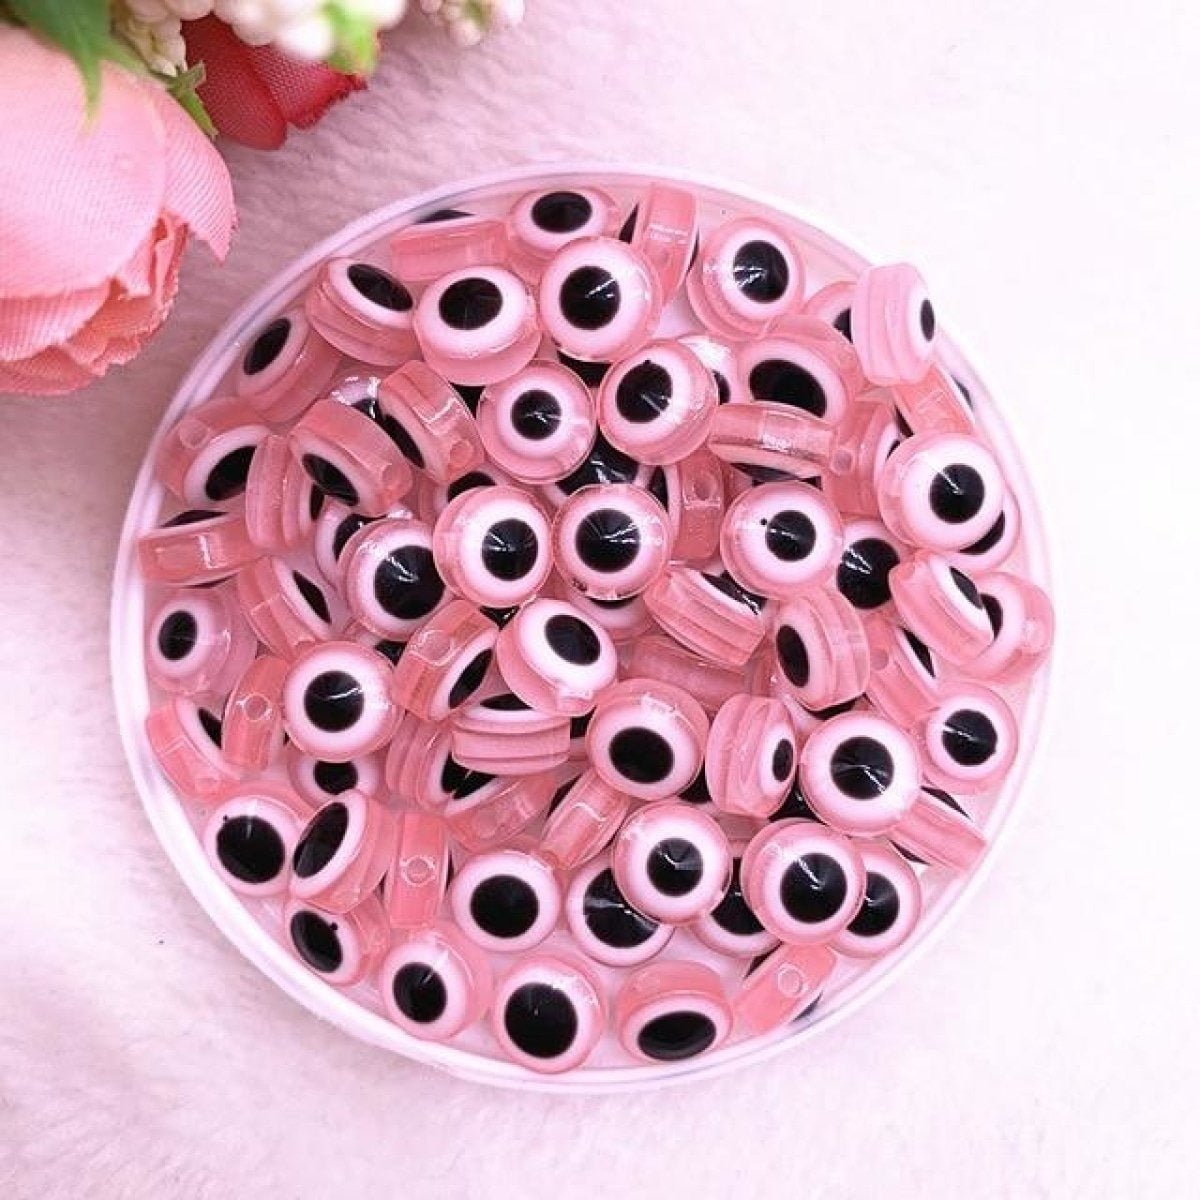 48pcs 8/10mm Resin Spacer Beads Double Sided Eyes for Jewellery Making DIY Bracelet Beads Flat Backed - Pink 8mm - - Asia Sell